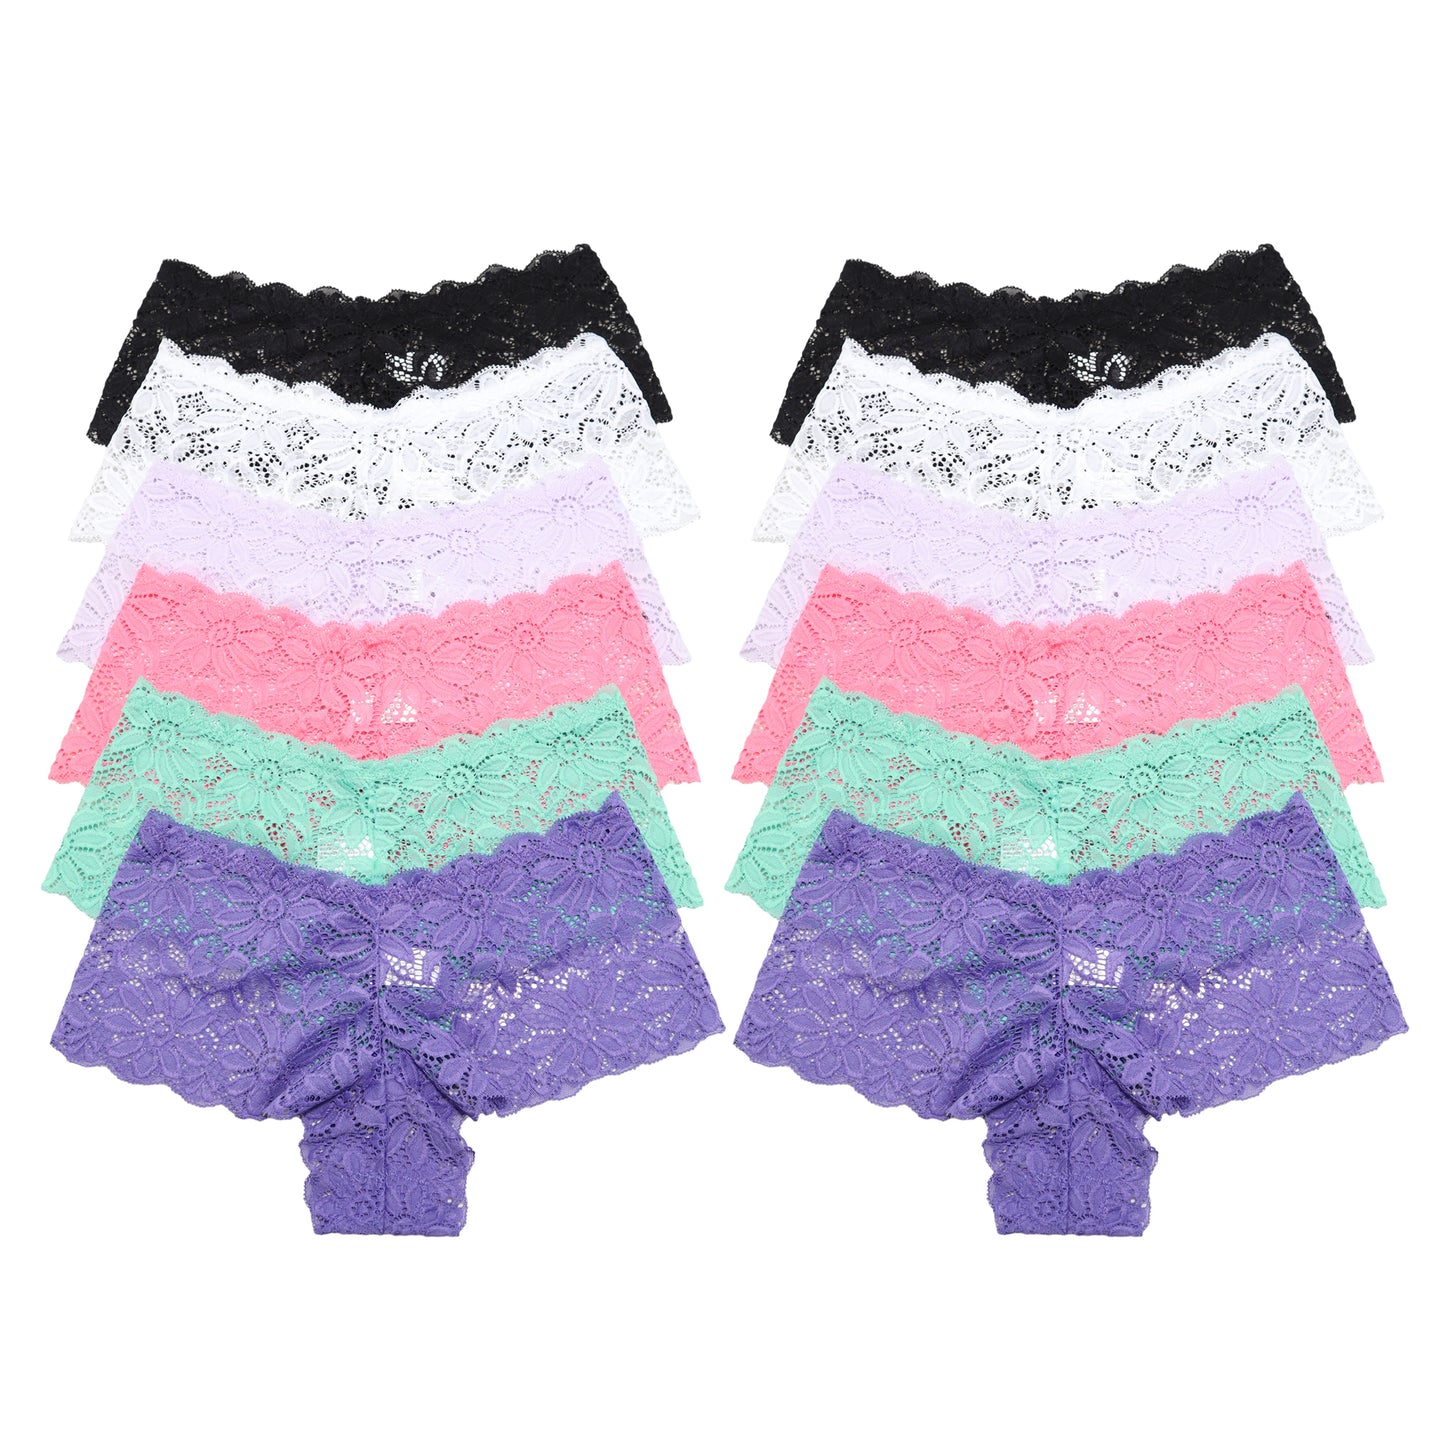 Lace Cheeky Boxer Panties with Flower Design (12-Pack)